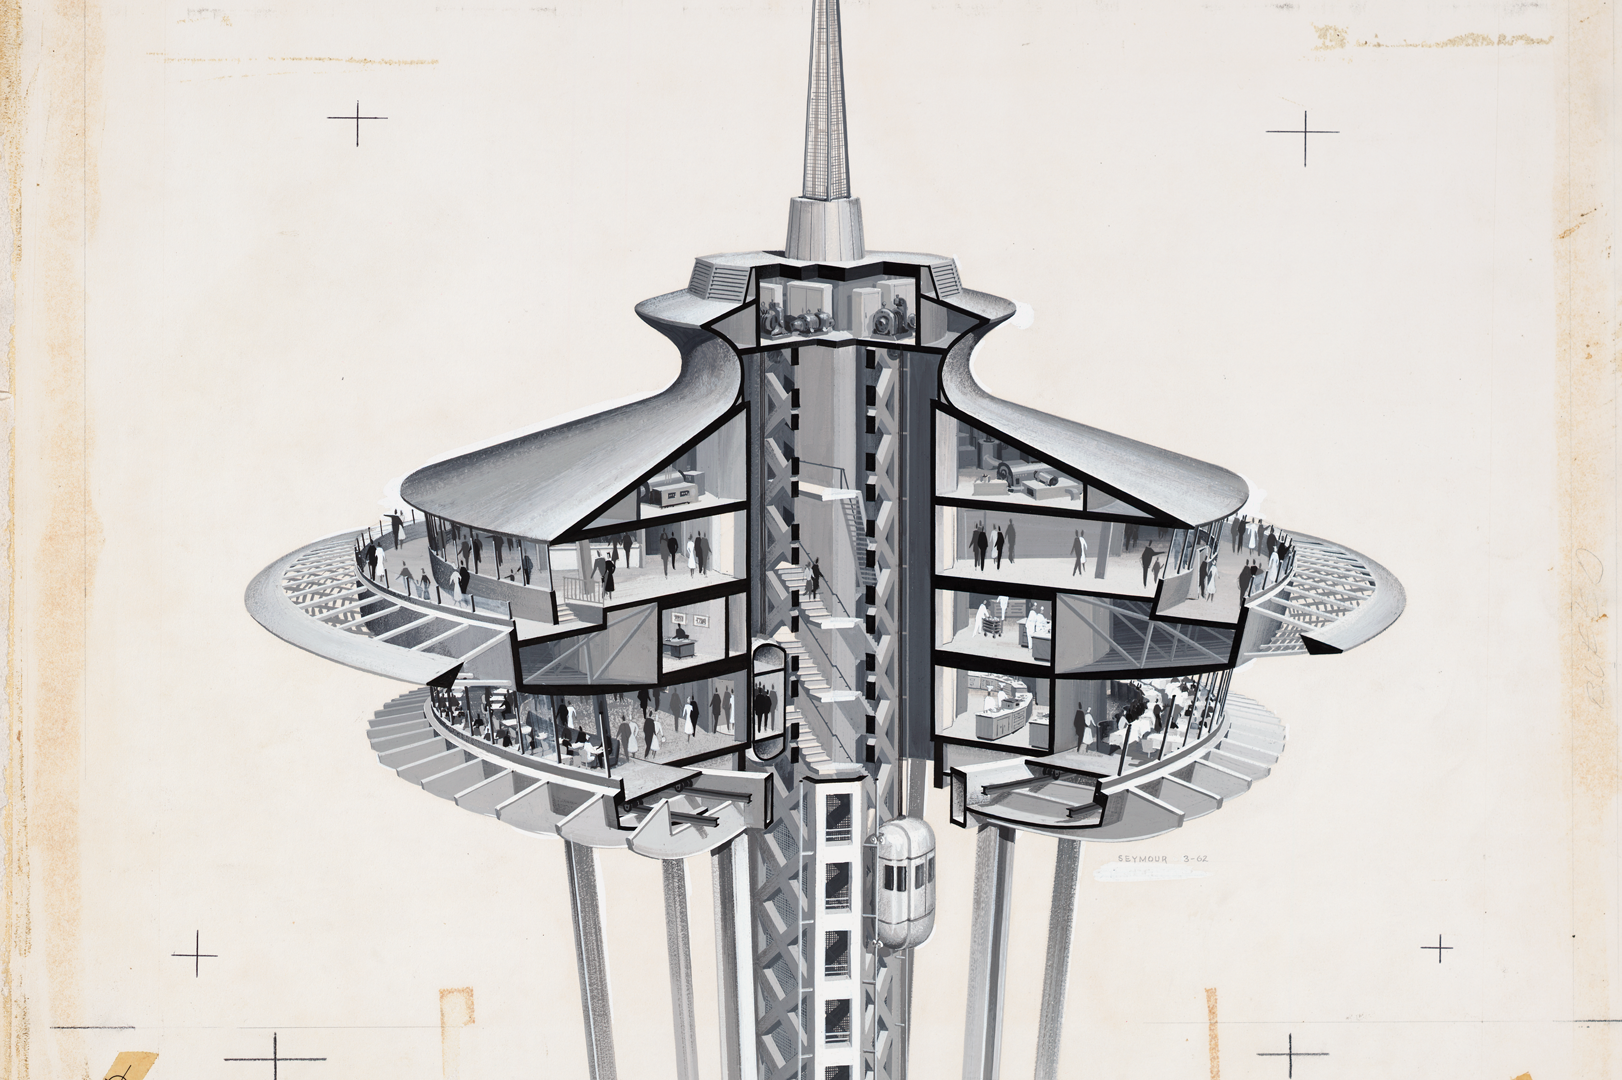 Kinetic Architecture and Aerial Rides: Towards a Media Archaeology of the Revolving Restaurant View by Synne Bull